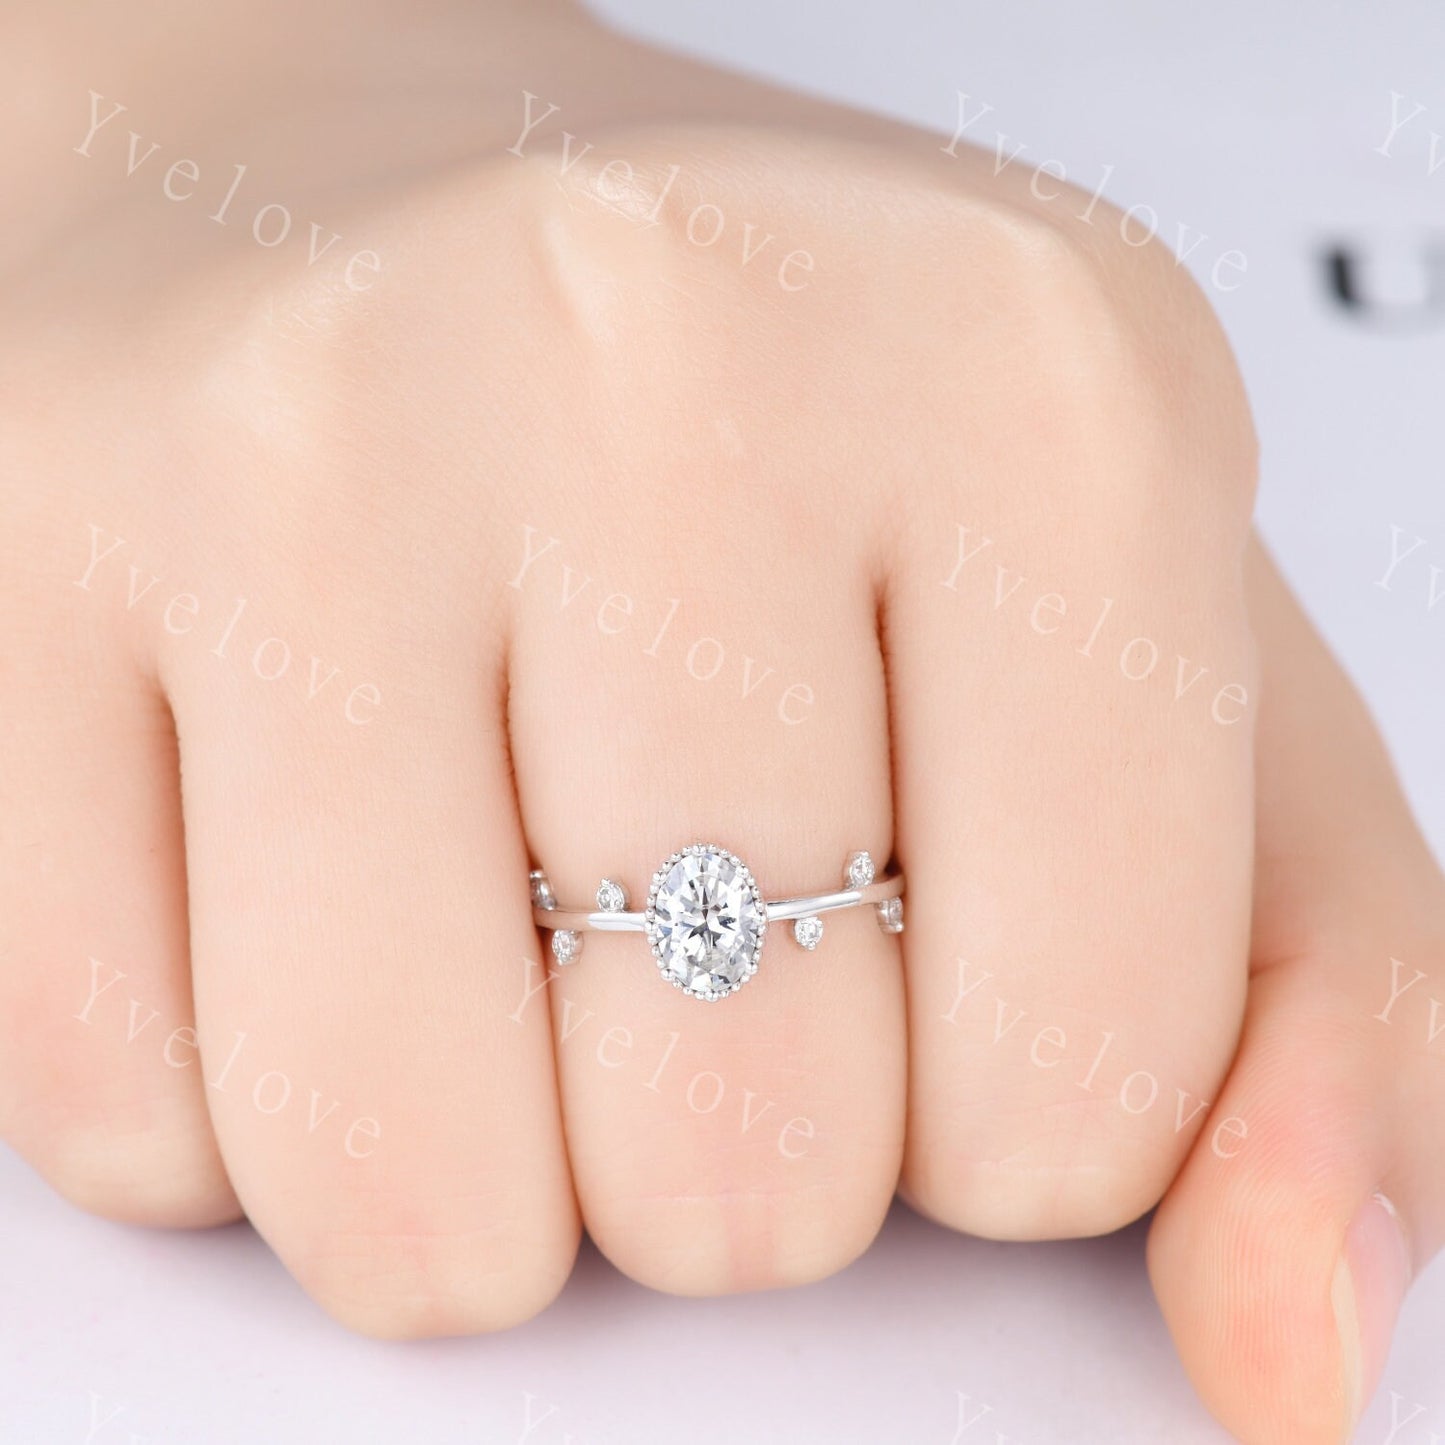 Dainty Moissanite Engagement Ring,White Gold Minimalist Ring,Twig Leaf Ring,Stacking Ring,Tiny Moissanite Ring,Unique Promise Ring For Her